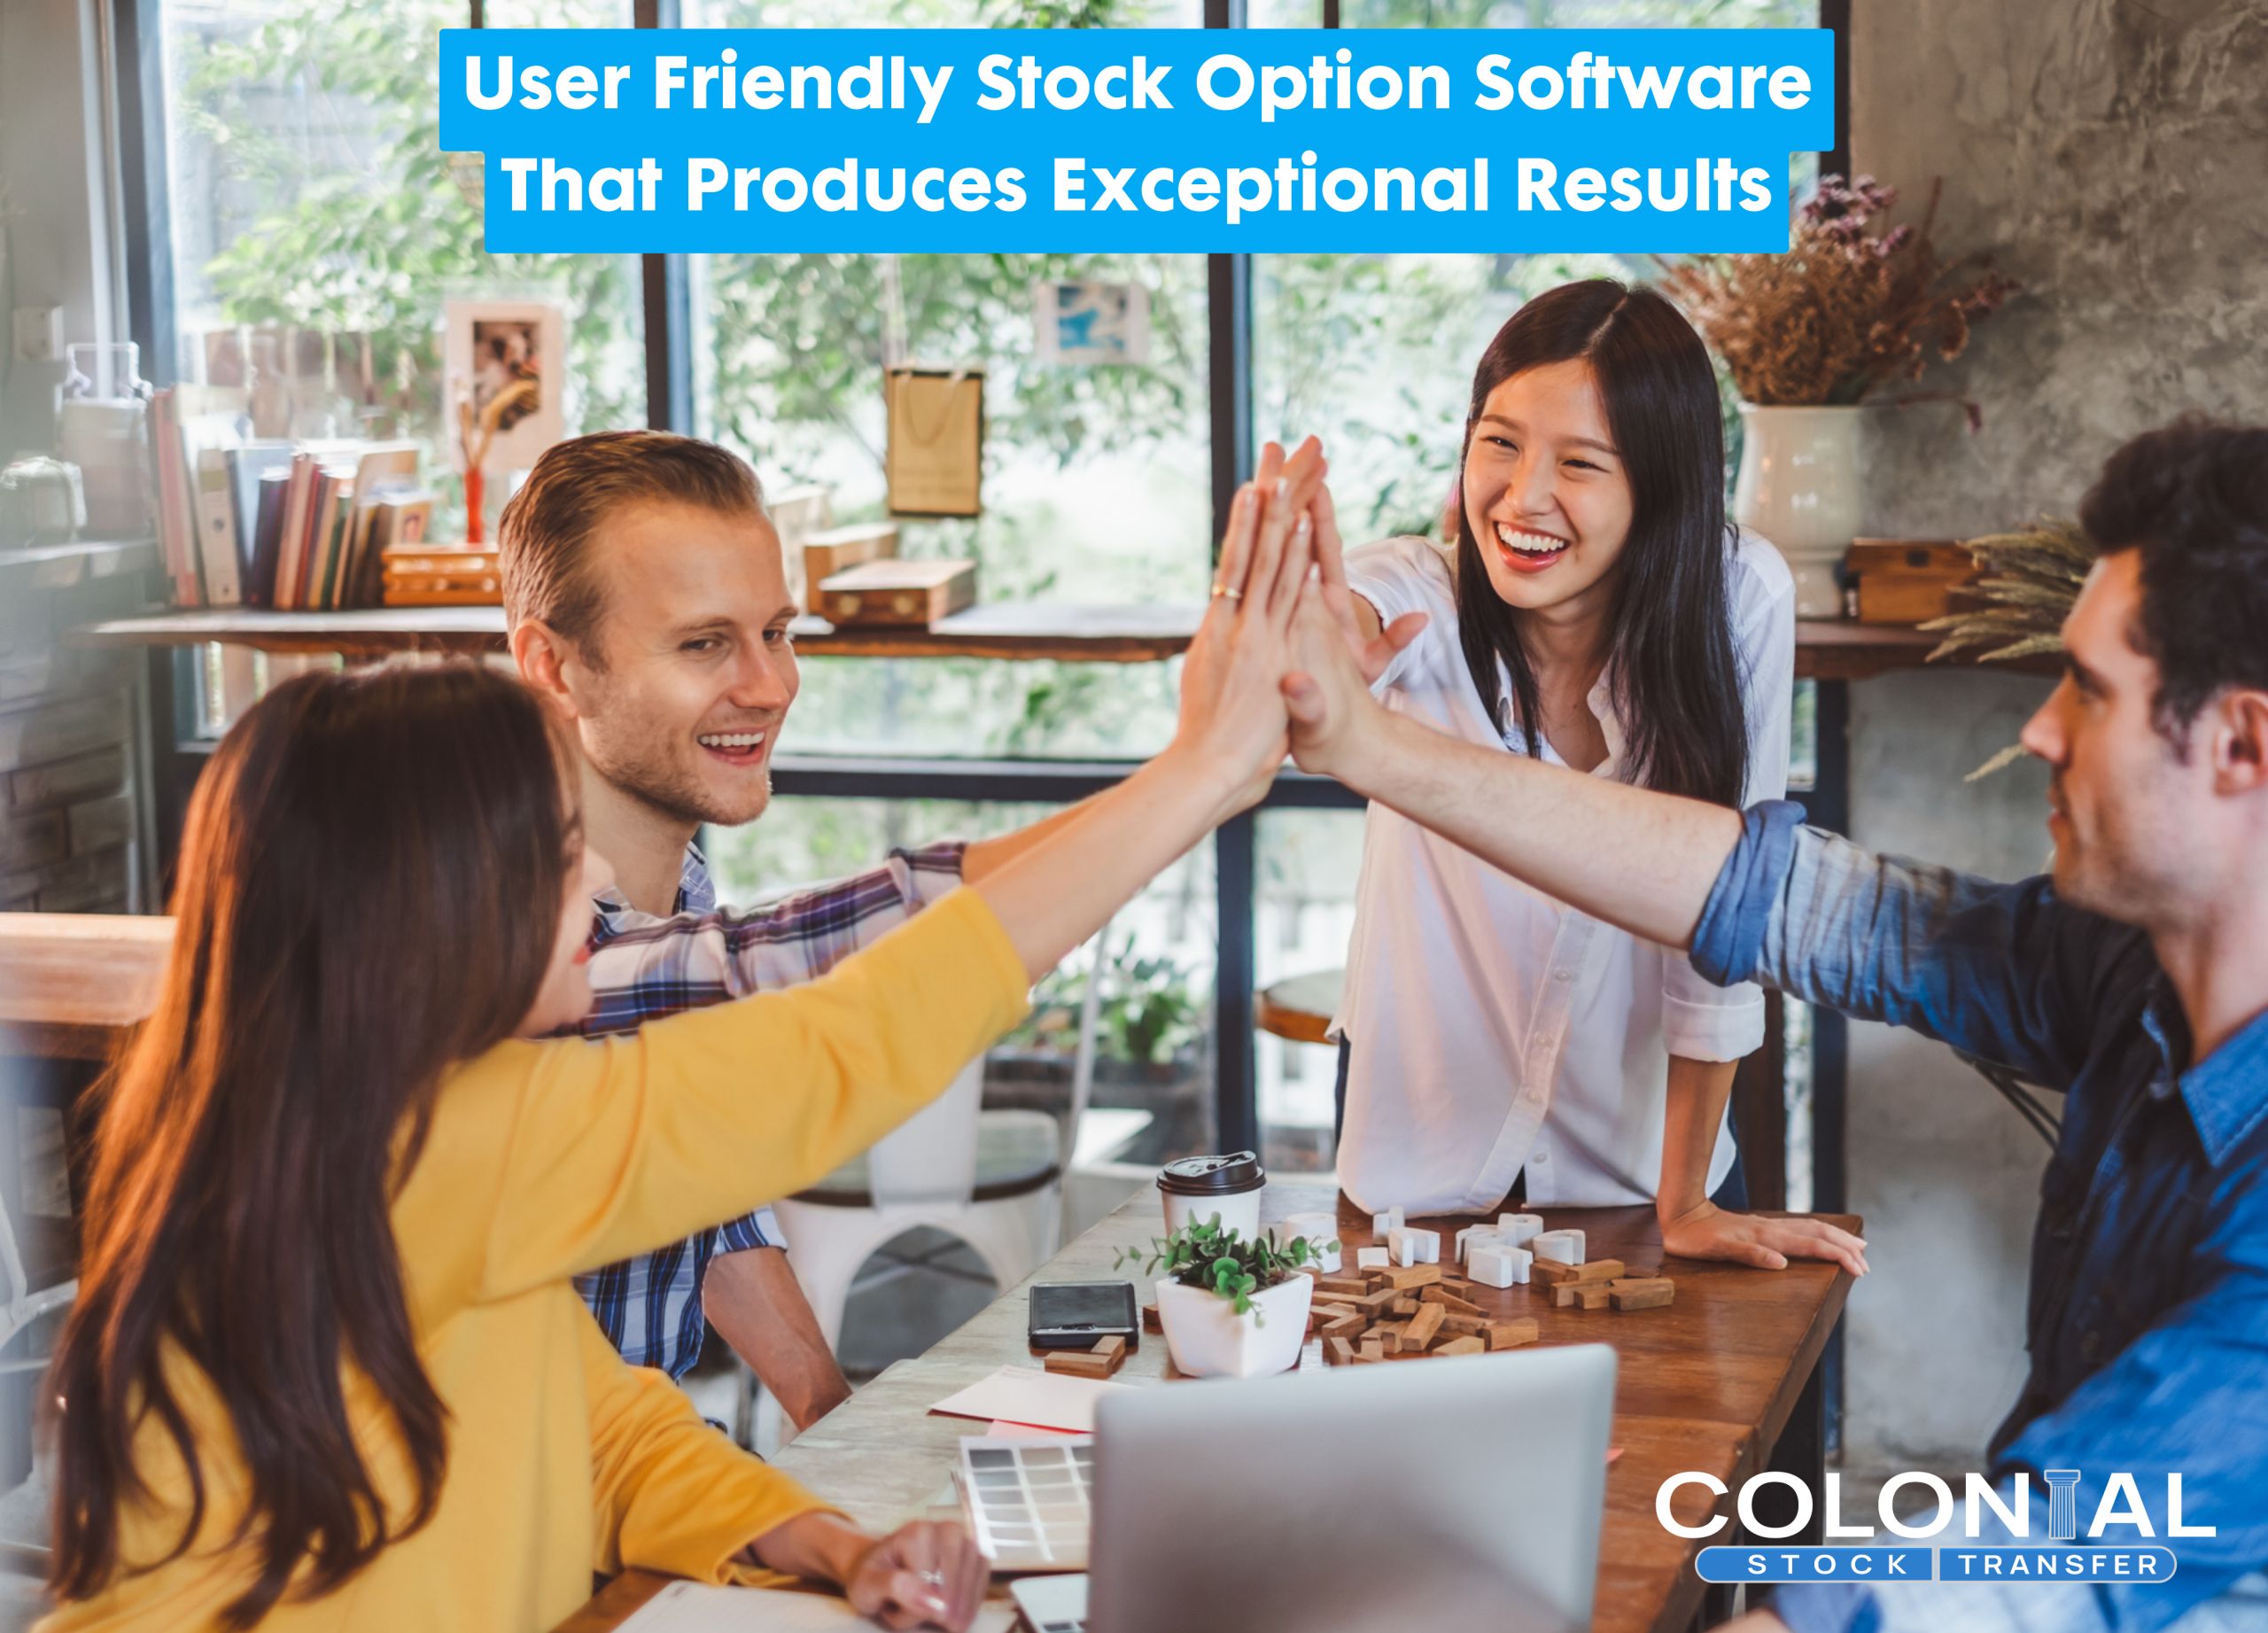 User Friendly Stock Option Software That Produces Exceptional Results